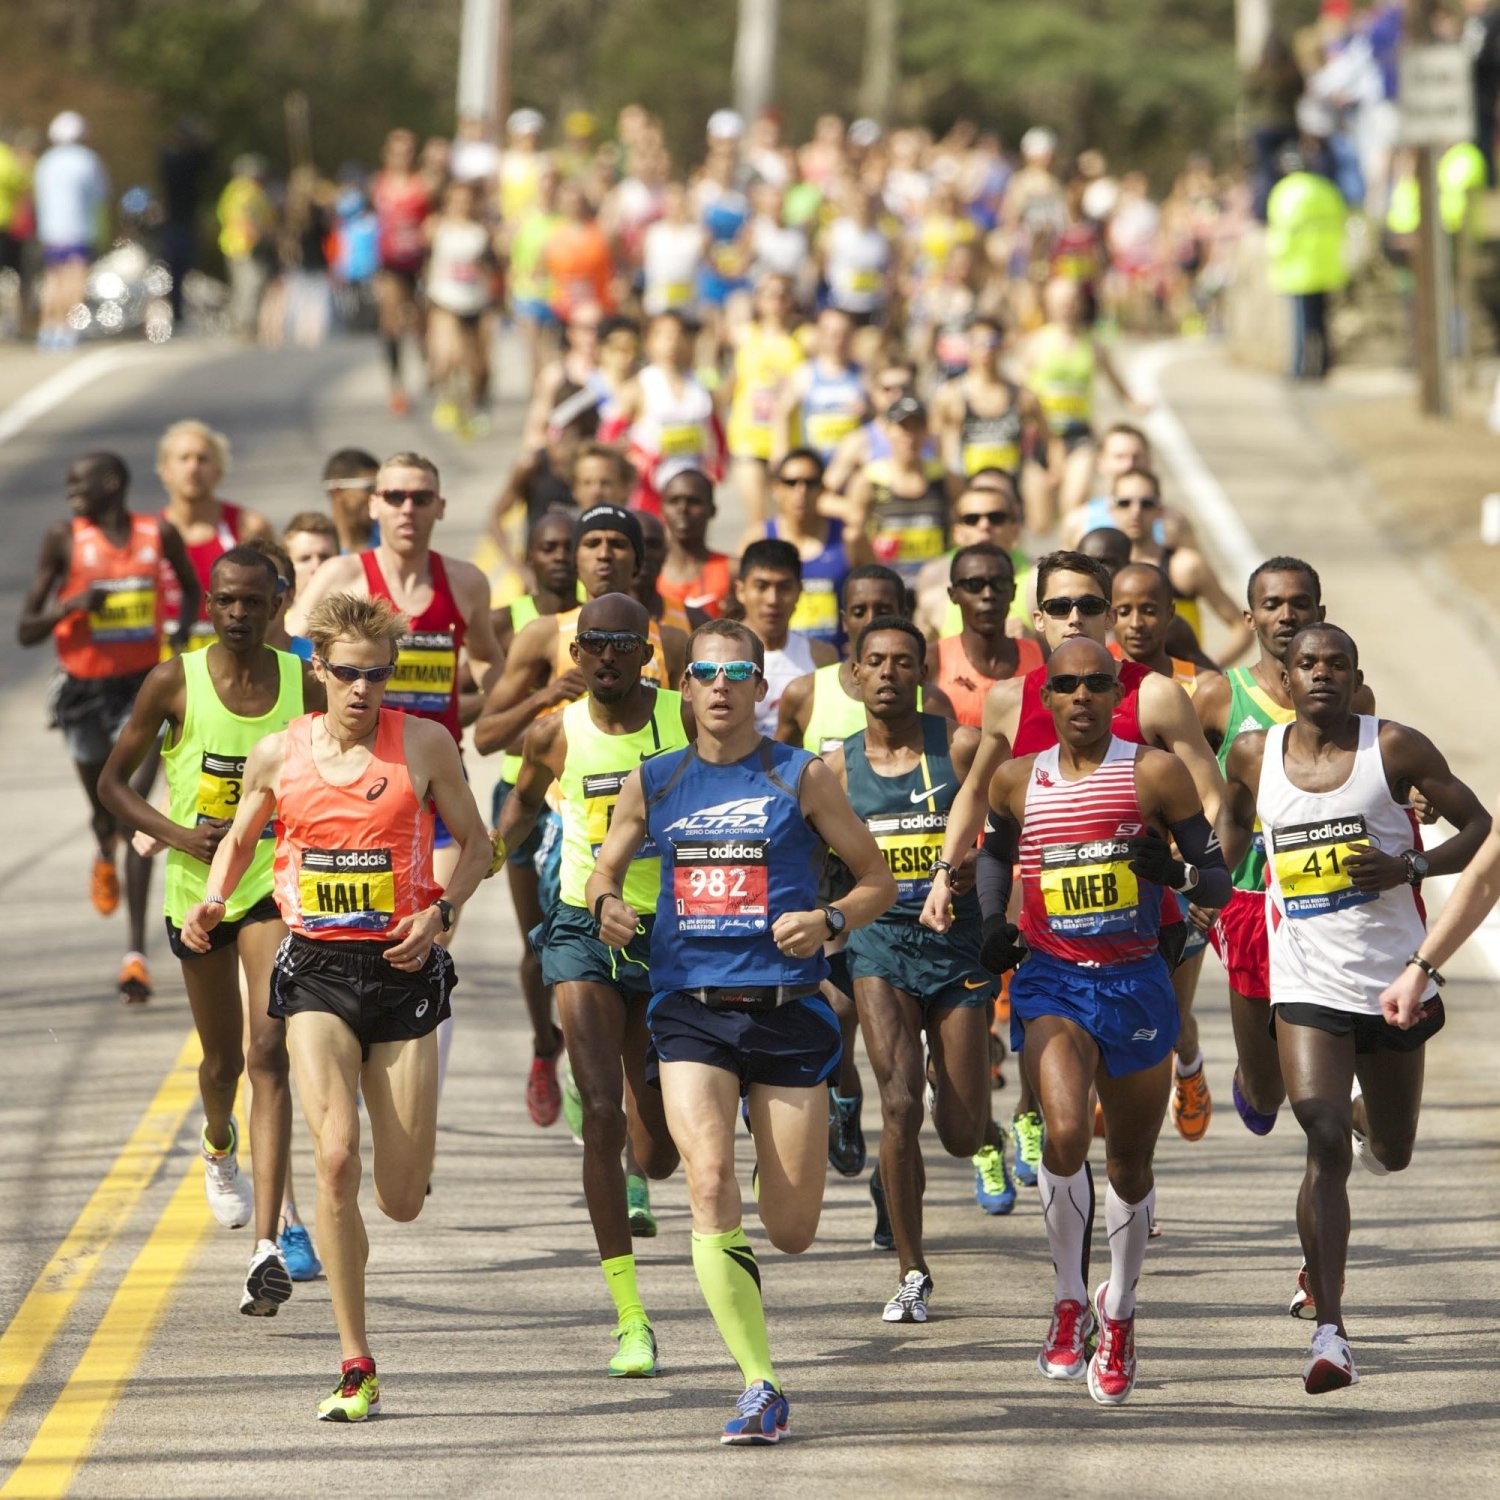 Austin Half marathon runners ready for return of live racing after